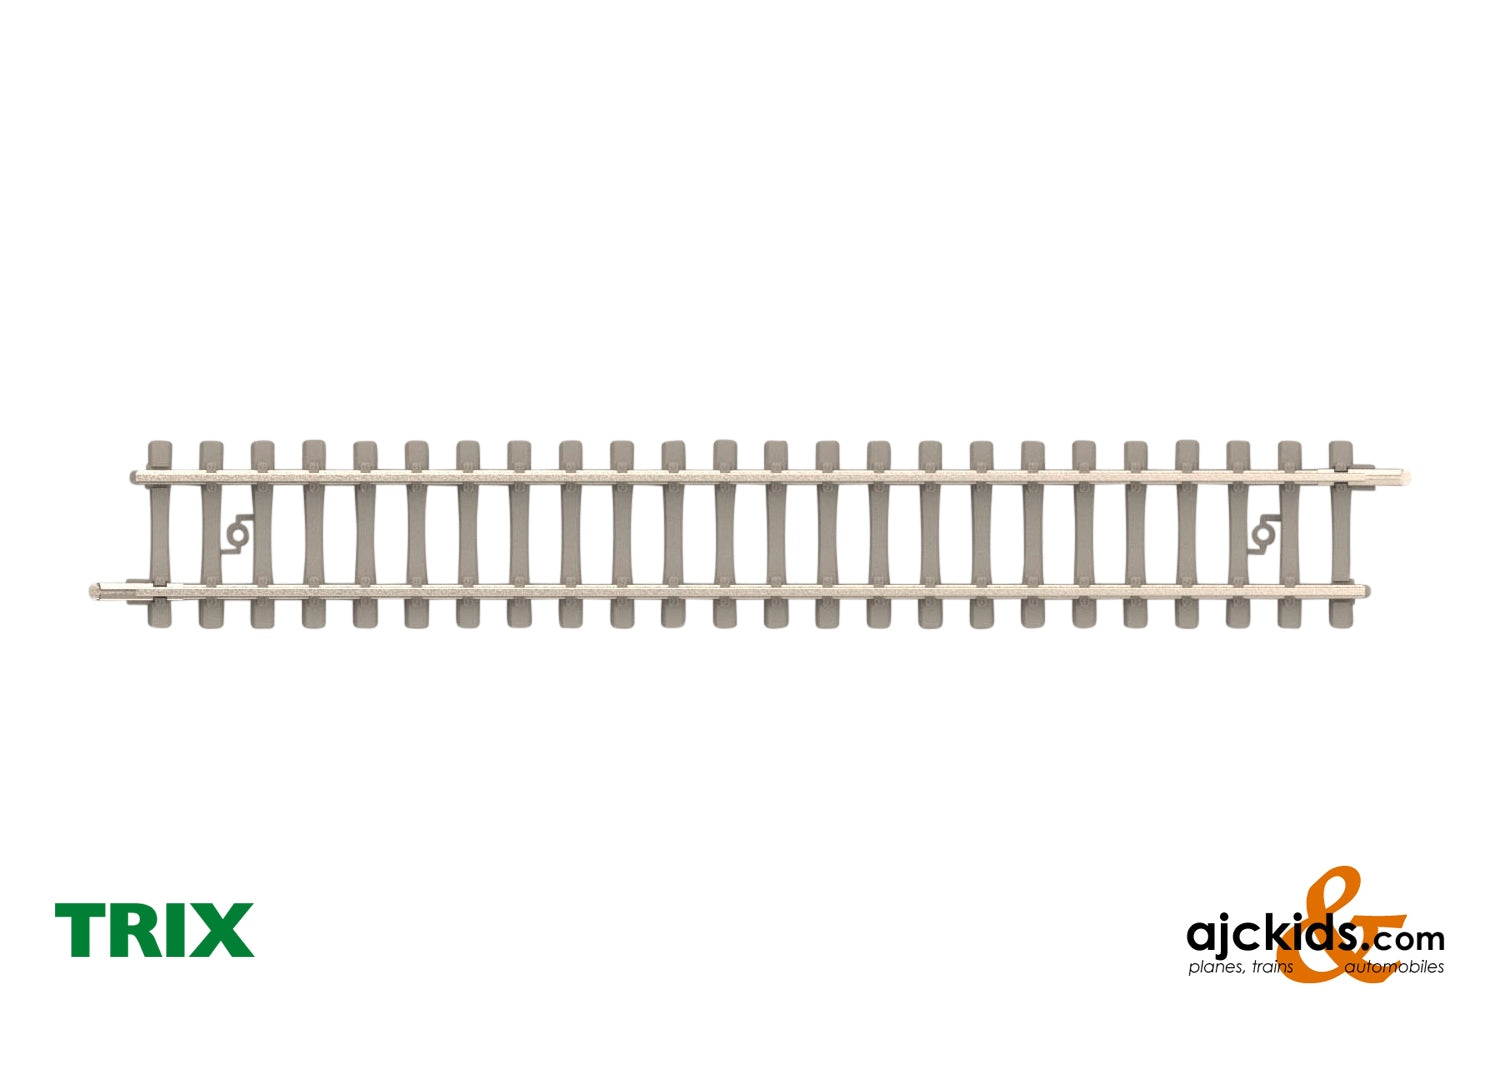 Trix 14504 - Straight Track with Concrete Ties